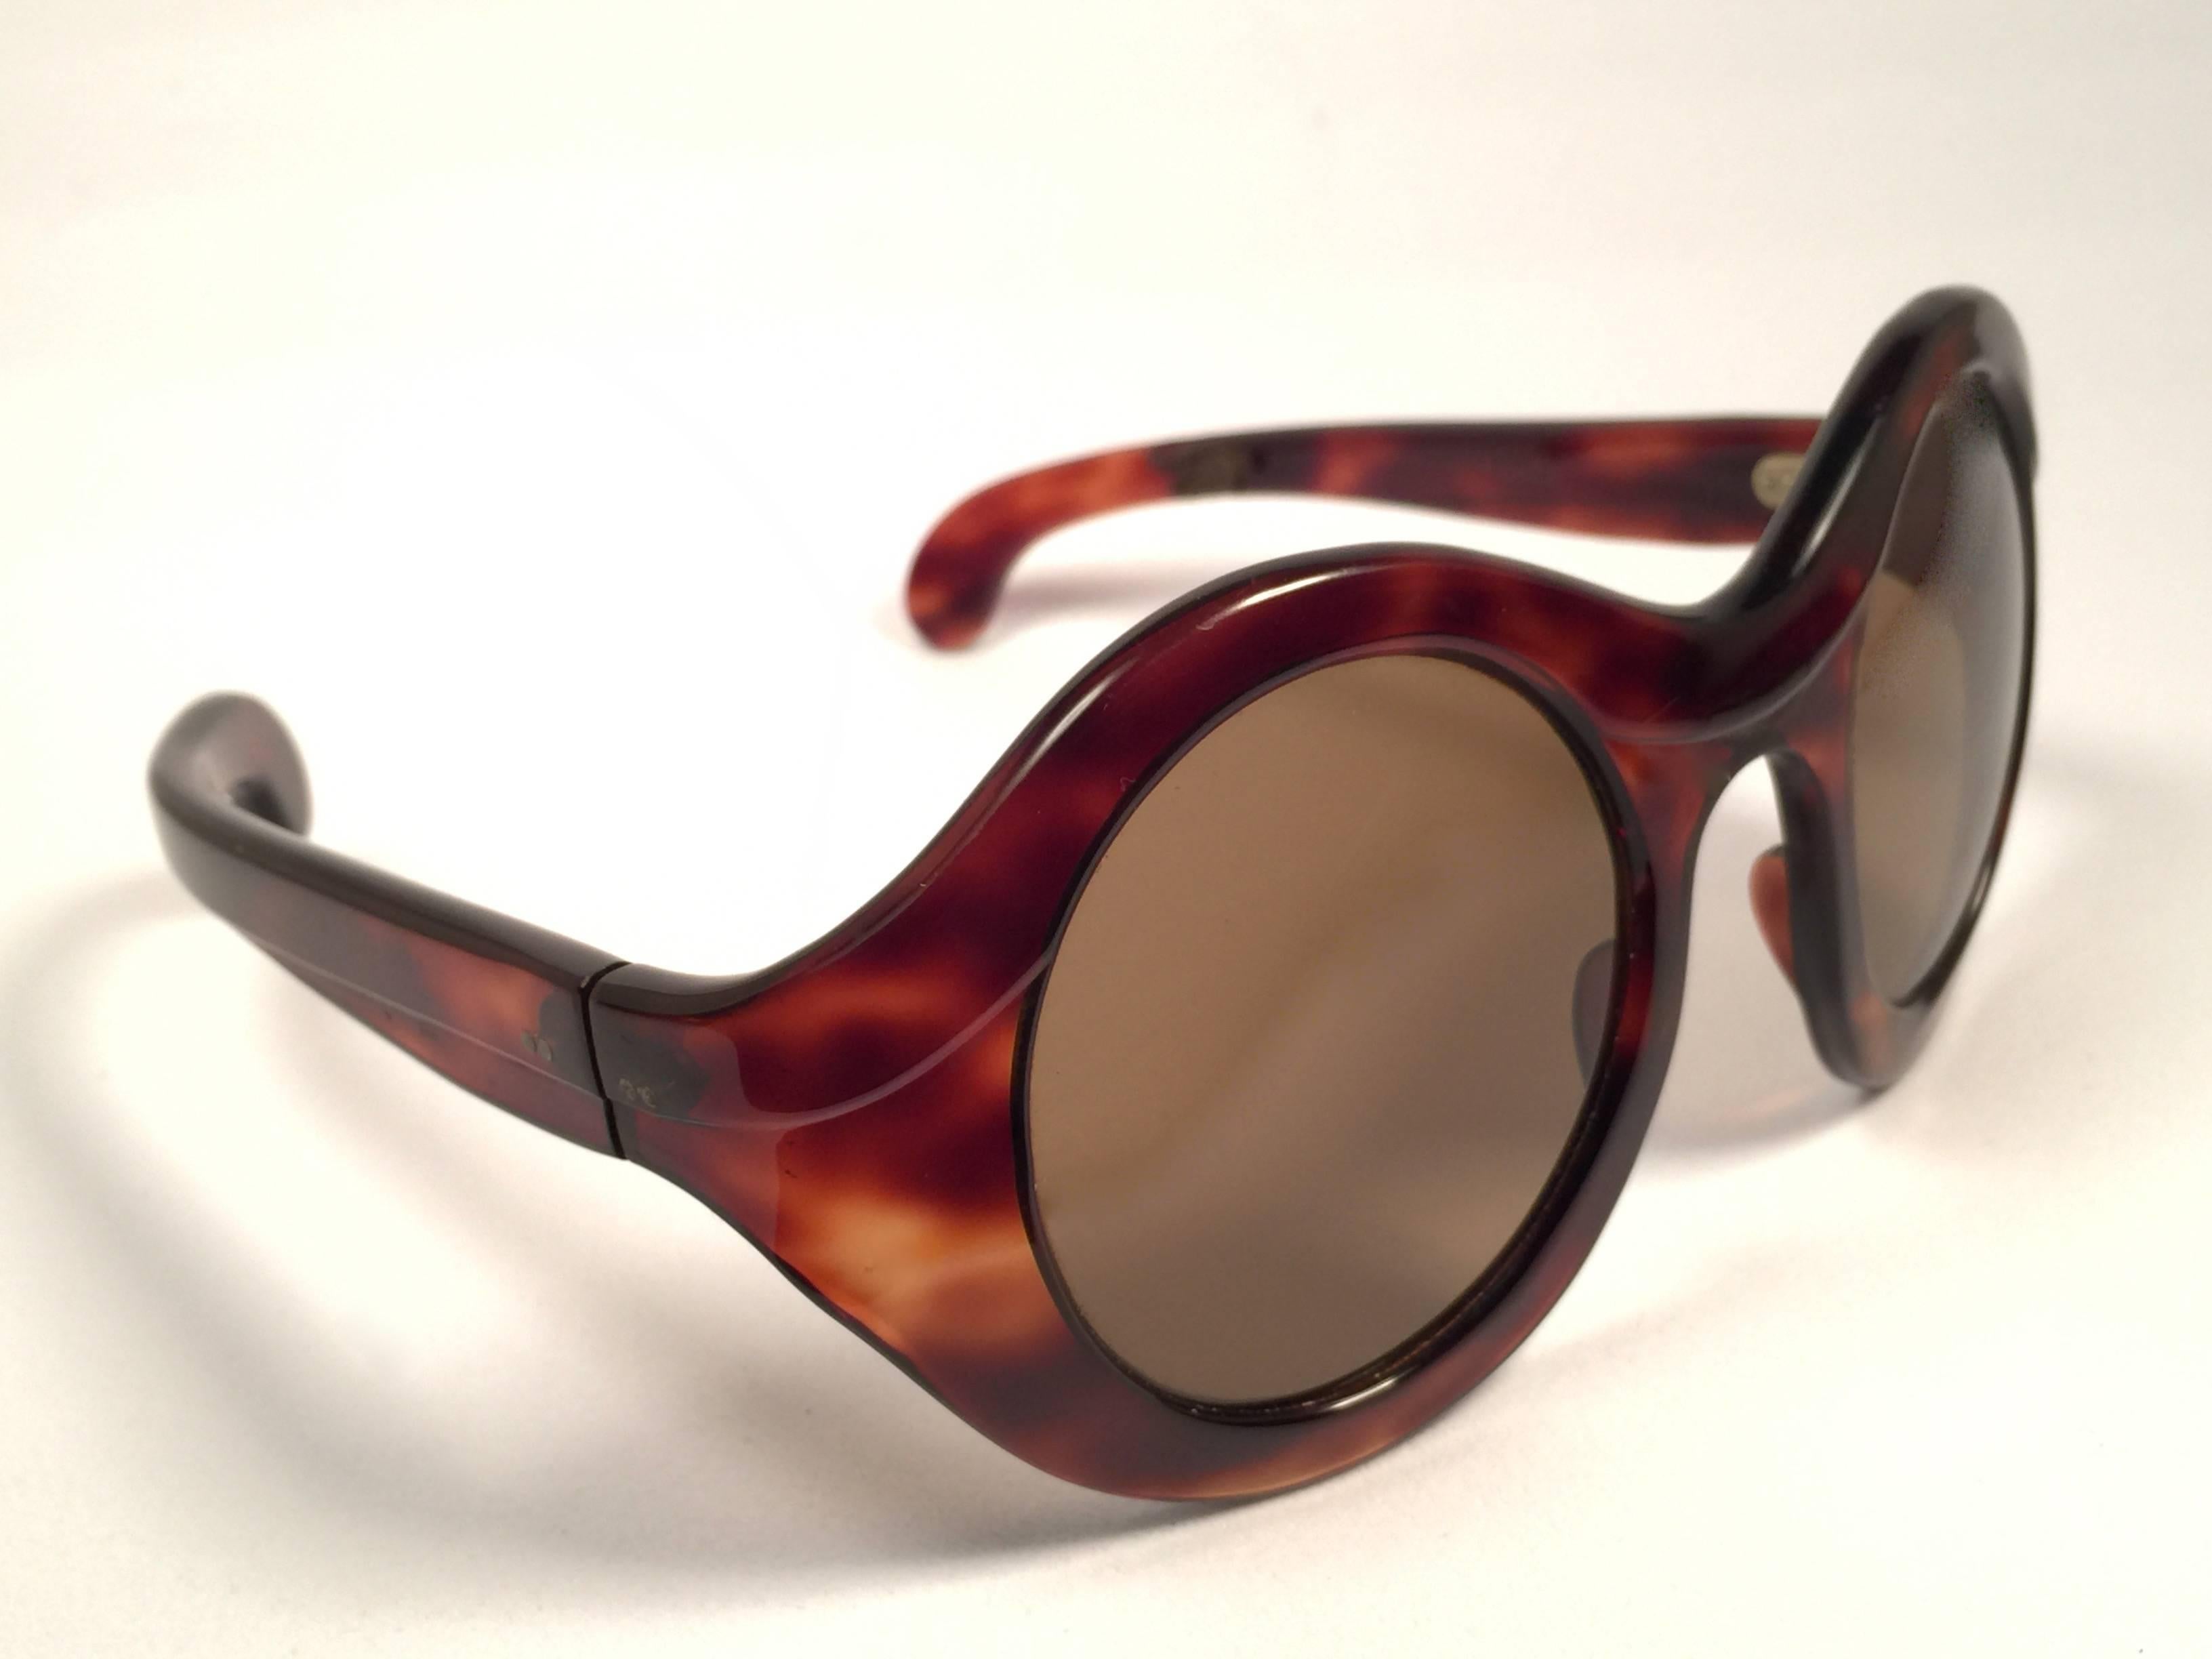 New rare collector's item vintage Philippe Chevalier dark tortoise oversized sunglasses with solid brown lenses.   
A superb find. This item have a damage on the right temple hardly noticeable while wearing. Please study the pictures.

Please notice